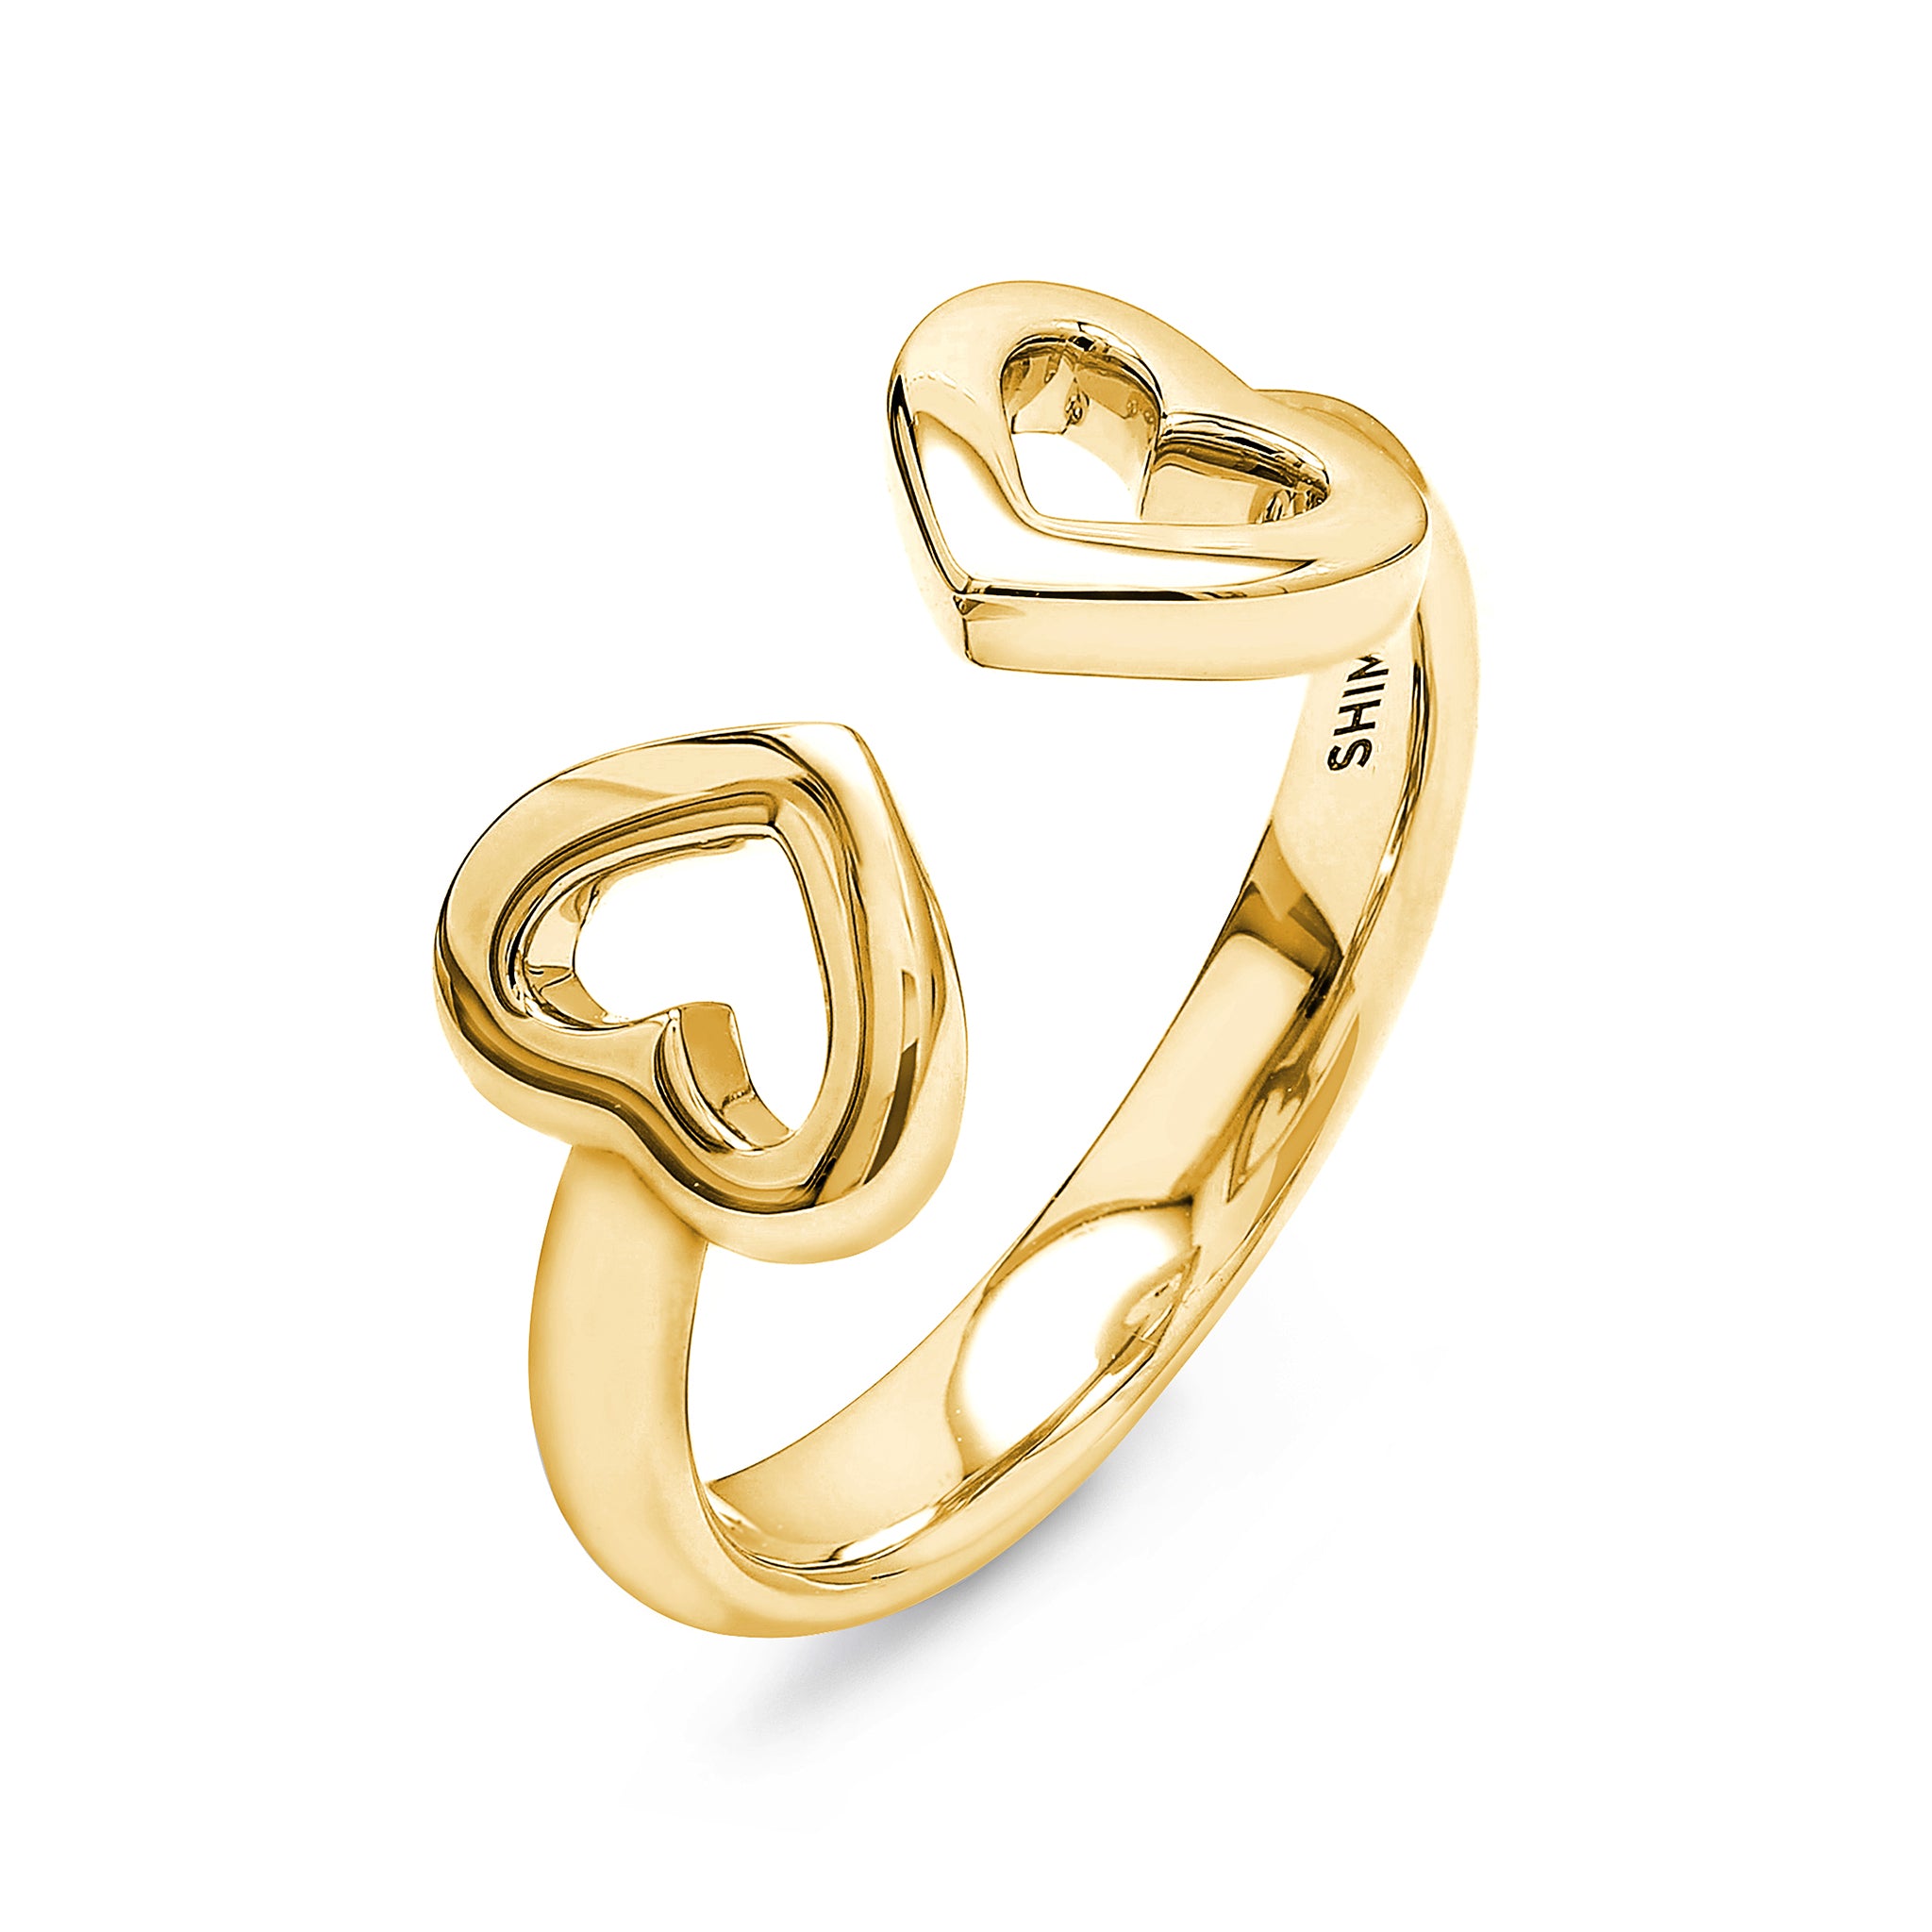 Shimansky - Two Hearts Open Ring Crafted in 18K Yellow Gold